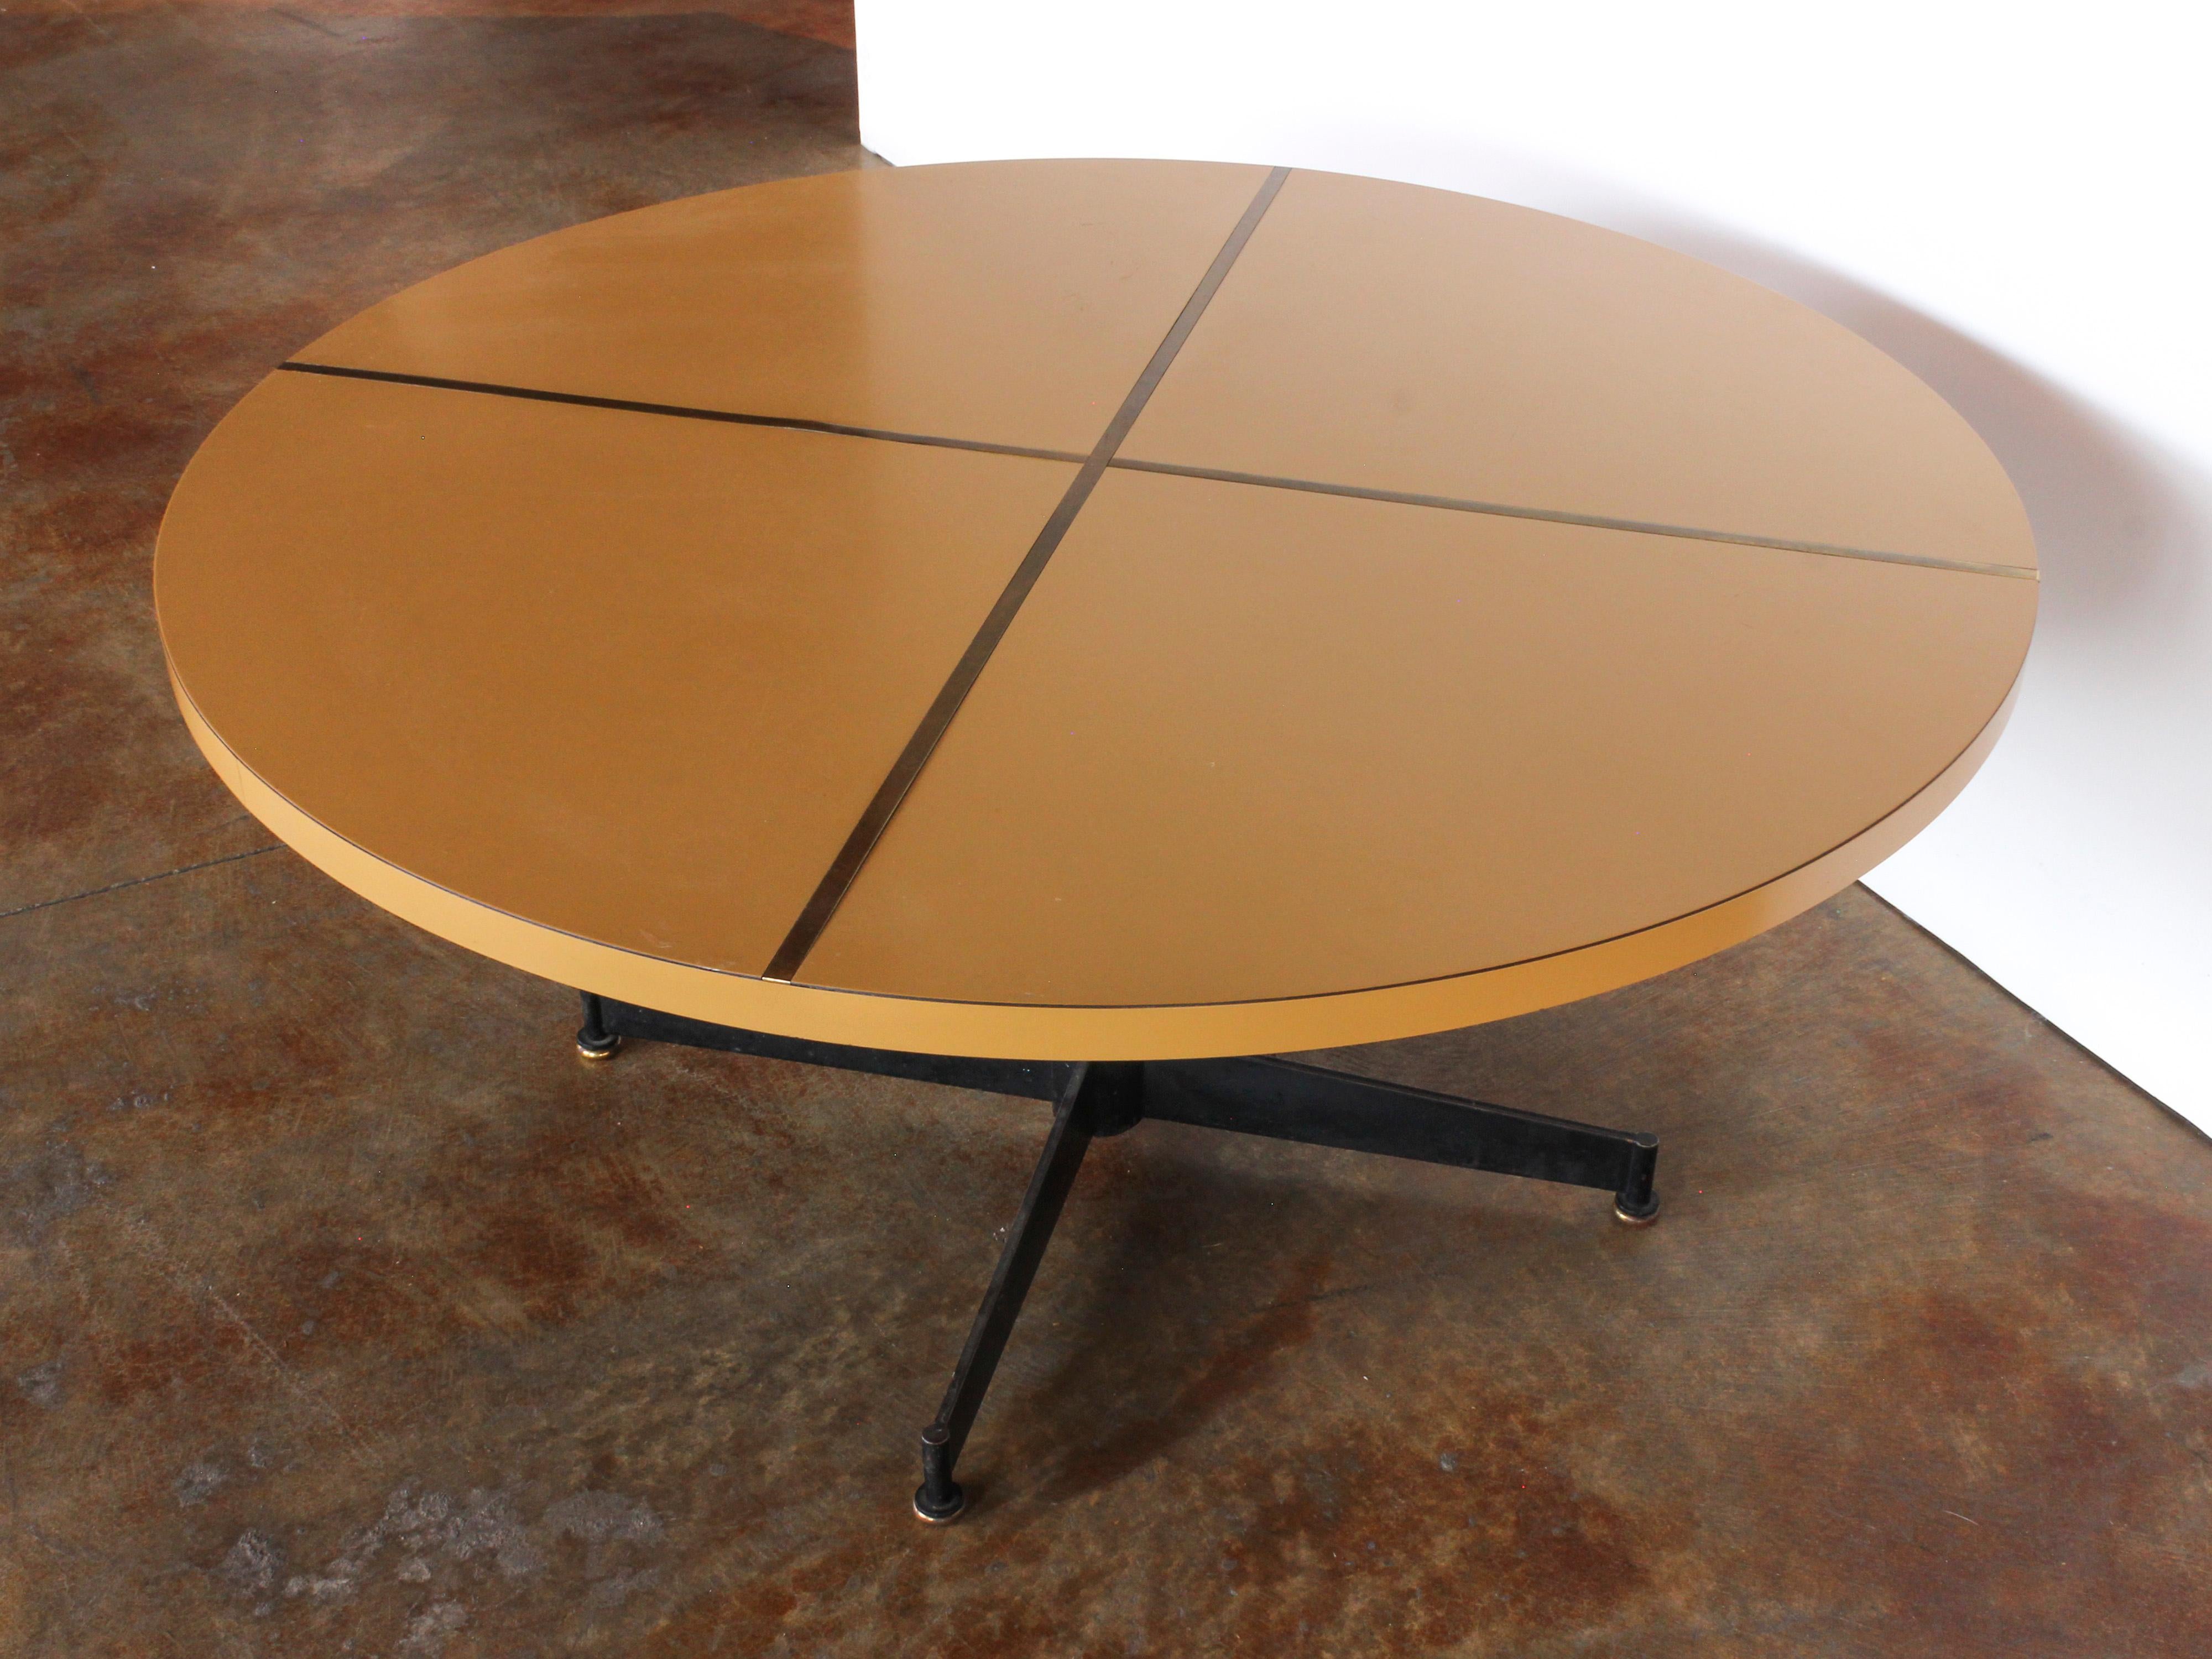 Mid-Century Modern Blackened Iron & Melamine Table with Brass Inlay, c. 1960 For Sale 3